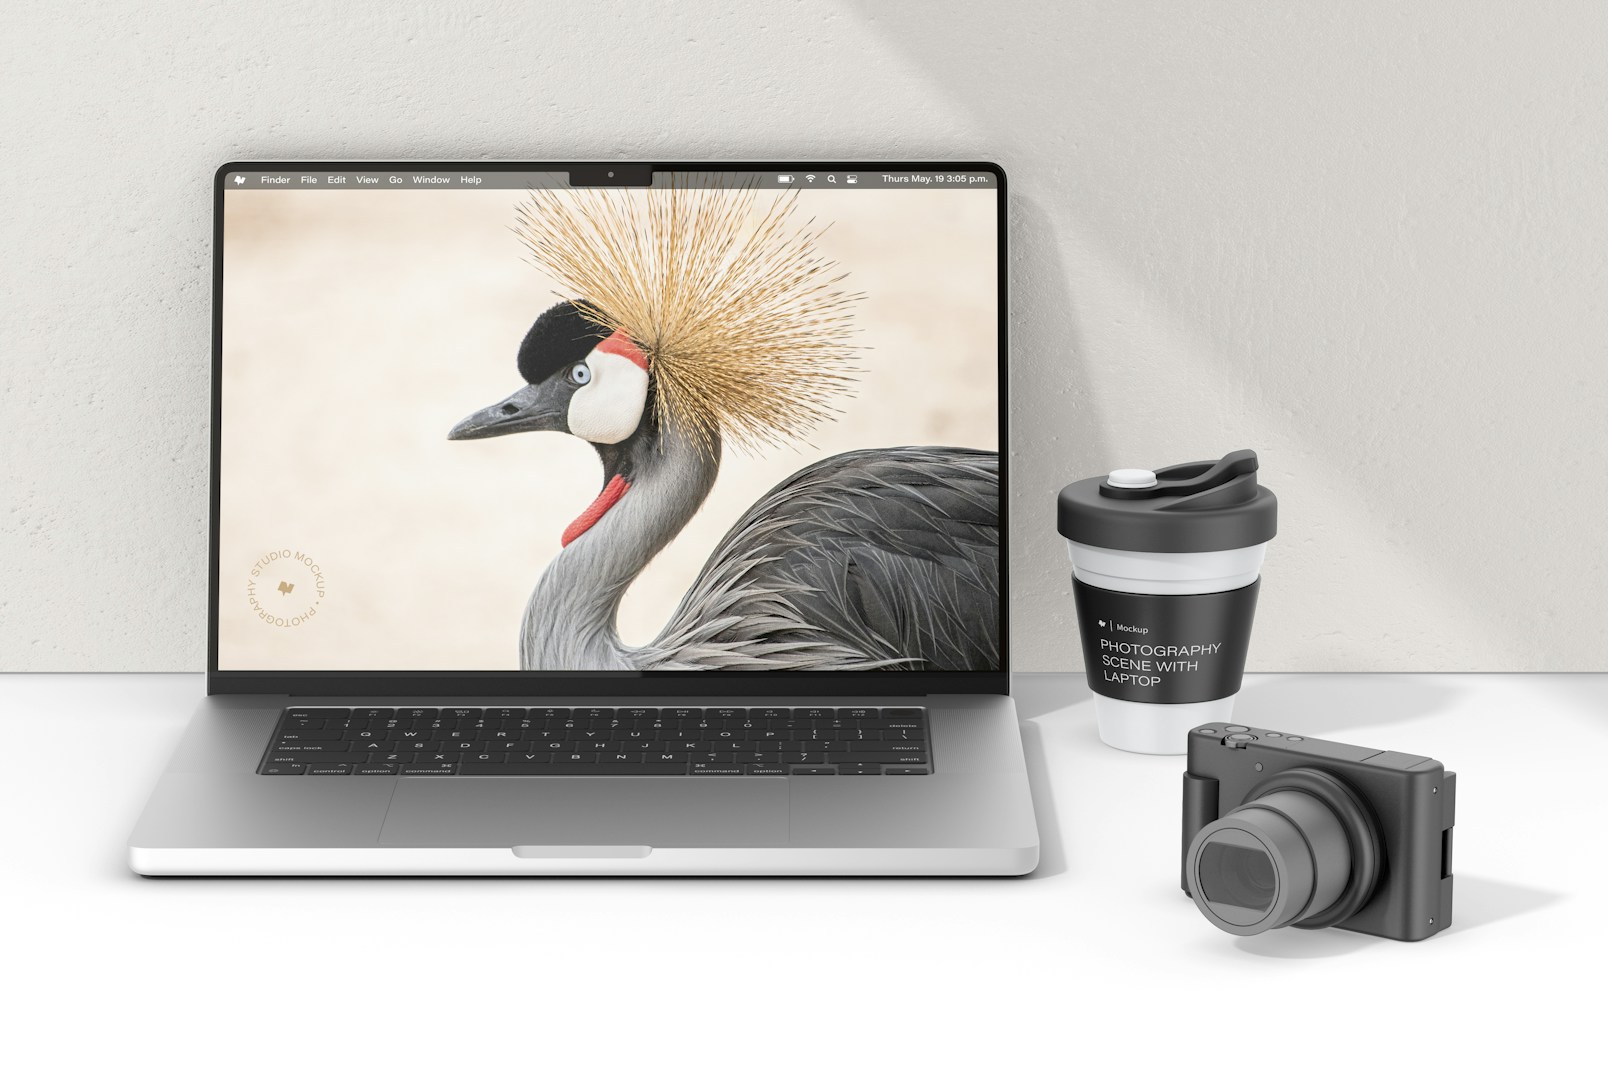 Photography Scene with Laptop Mockup, Front View